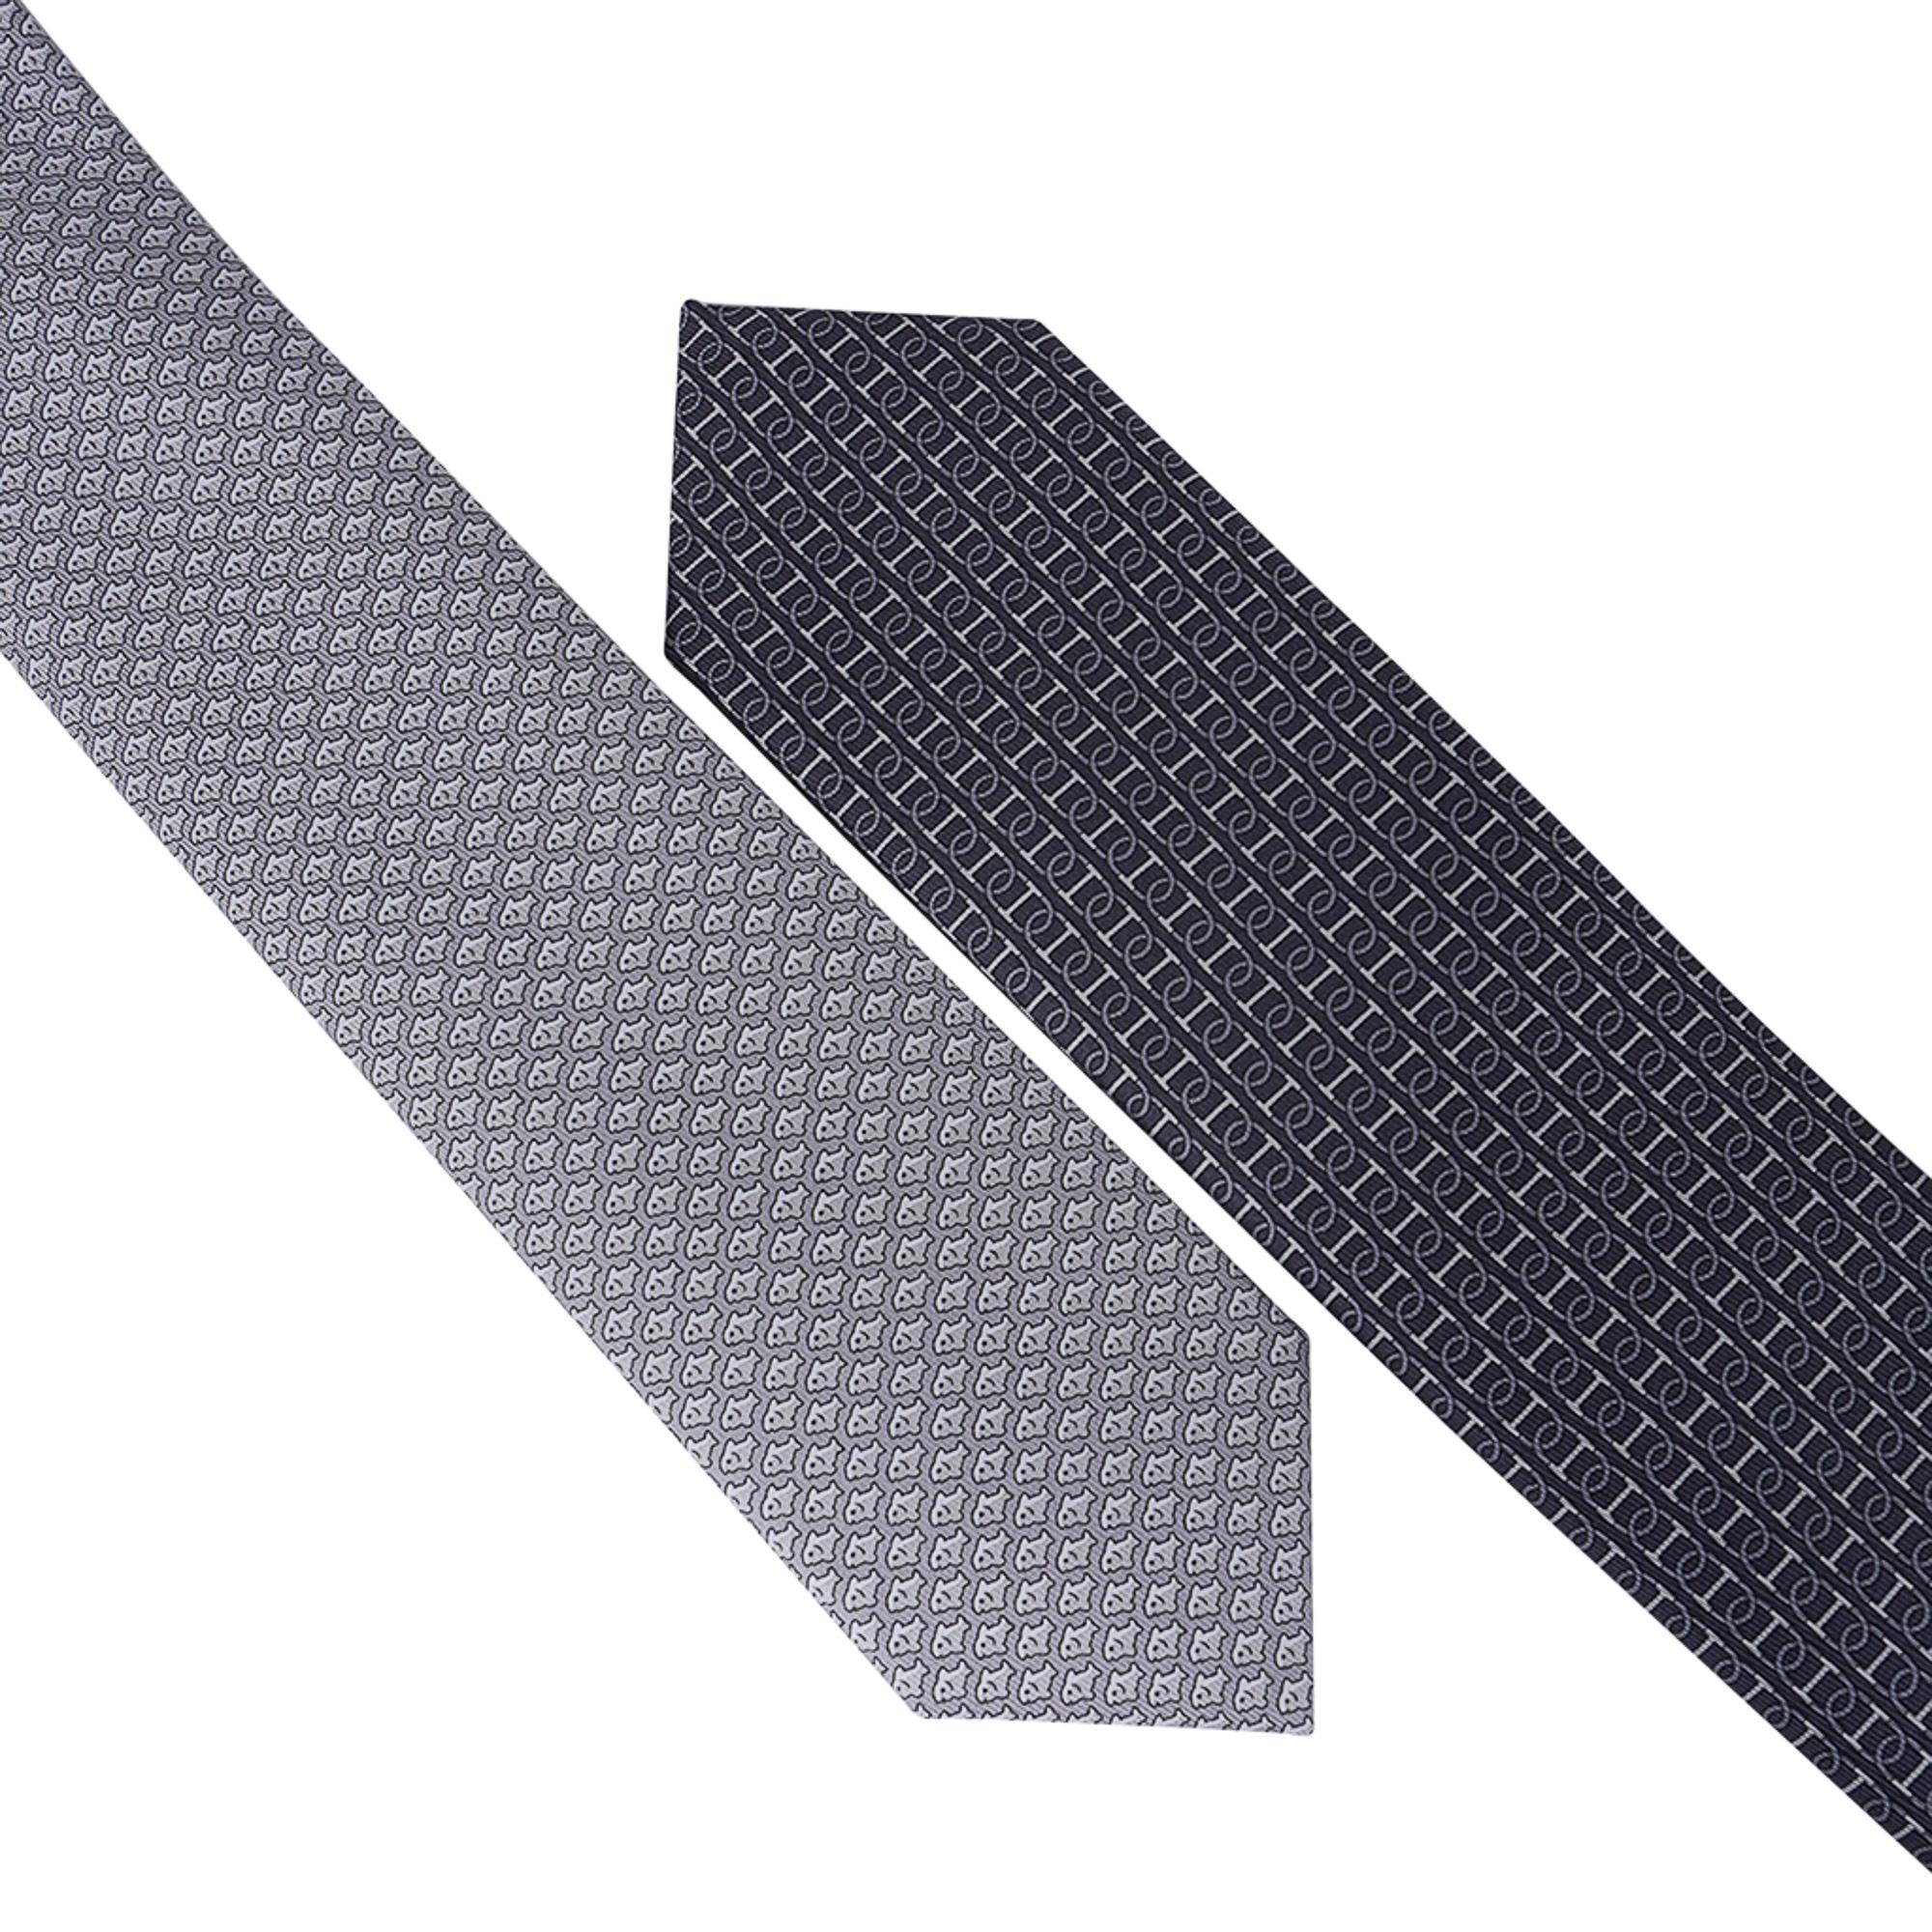 Mightychic offers an Hermes Double 6 Imprimee silk twillbi tie.
Anthracite and Gris colorway.
A double tie with 2 different designs, one is classic and the other fancy.
Can be worn either way according to one's mood!
NEW or NEVER WORN.
Comes with